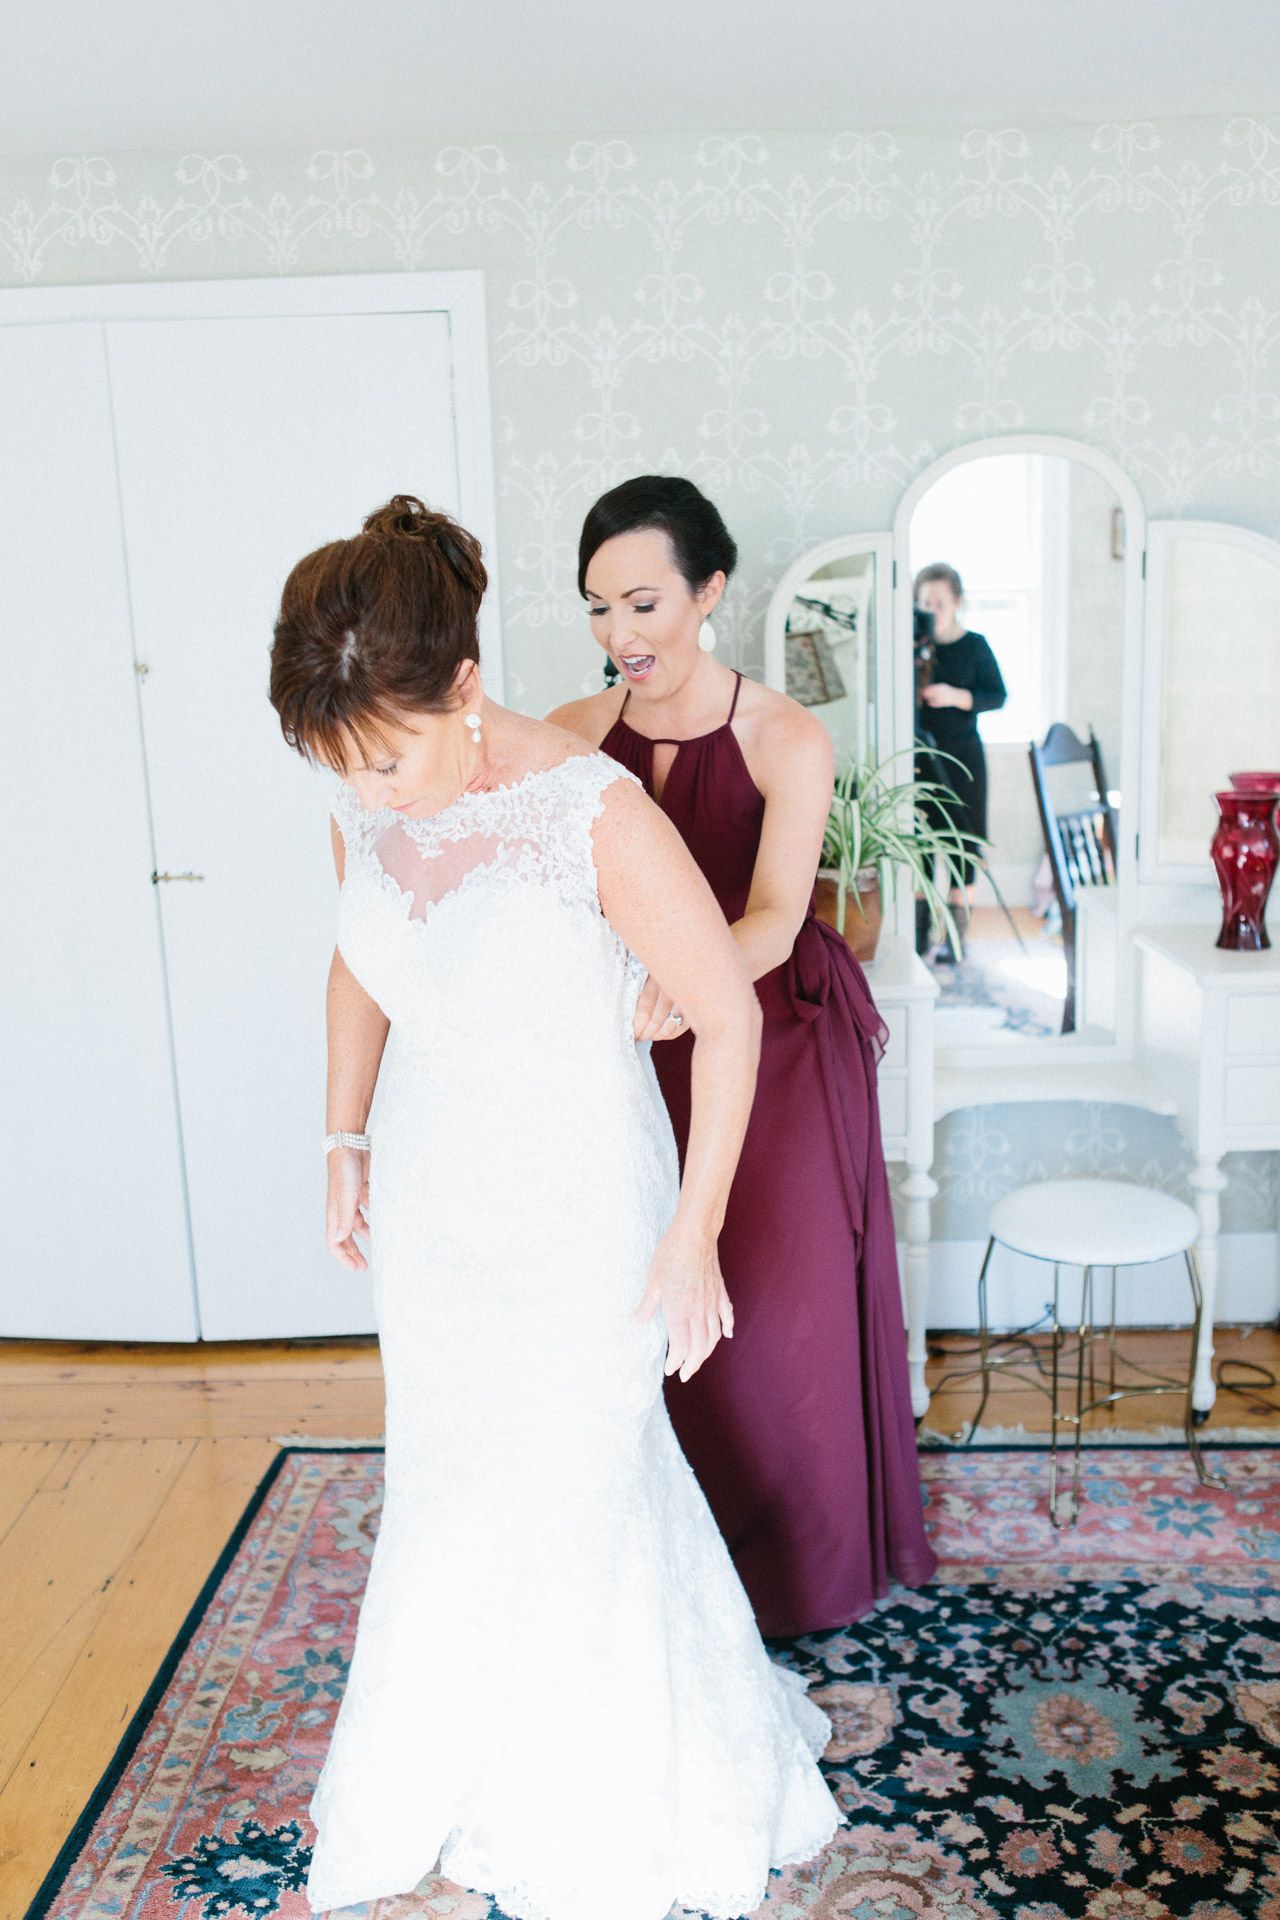 Bride's daughter helps bride into wedding gown before ceremony at Peirce Farm at Witch Hill wedding in Topsfield, MA